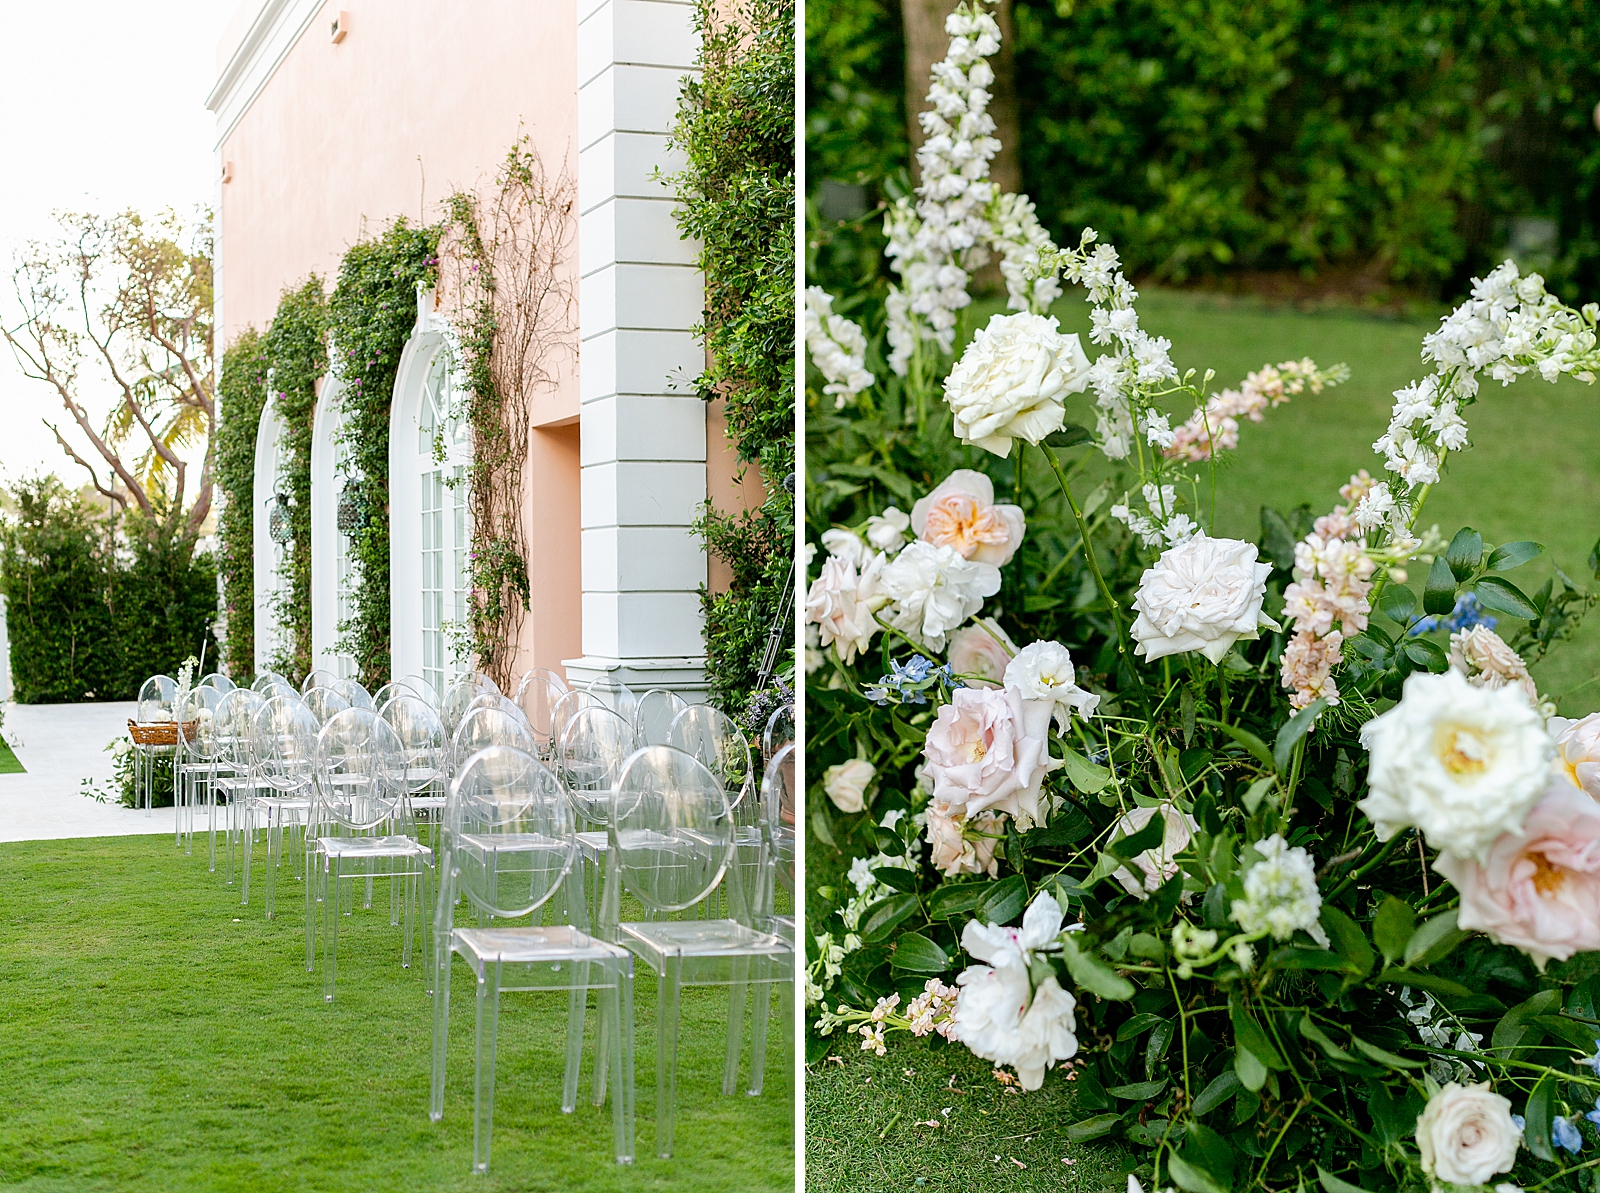 Detail shot of Ceremony area with clear chairs and flower decor